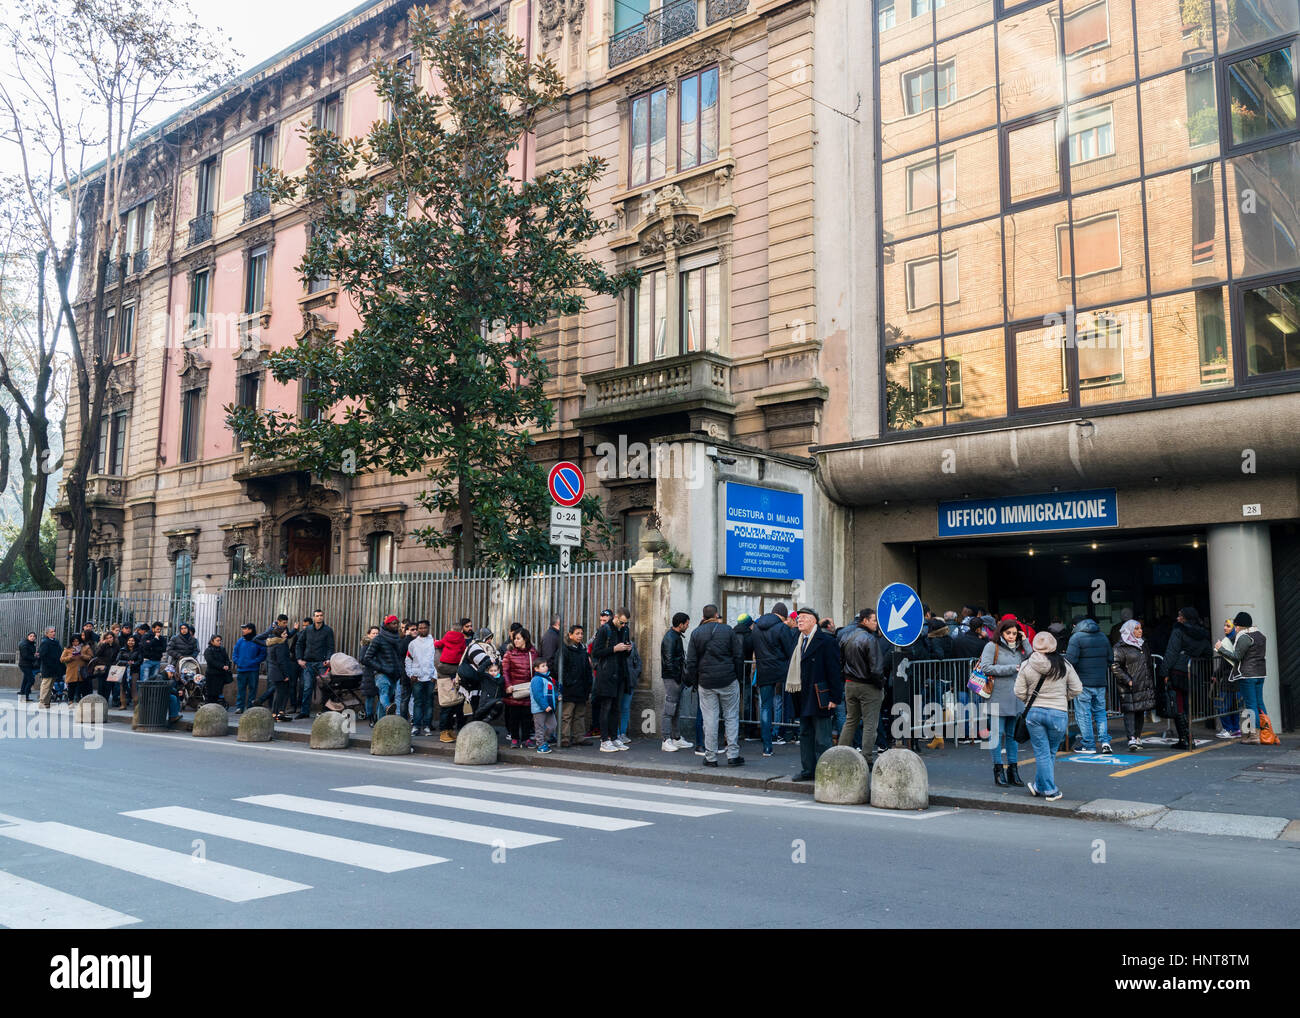 Queue for the Immigration Office in Milan, Italy. Italy is facing a refugee crisis due to ongoing wars in North Africa and the Middle East Stock Photo